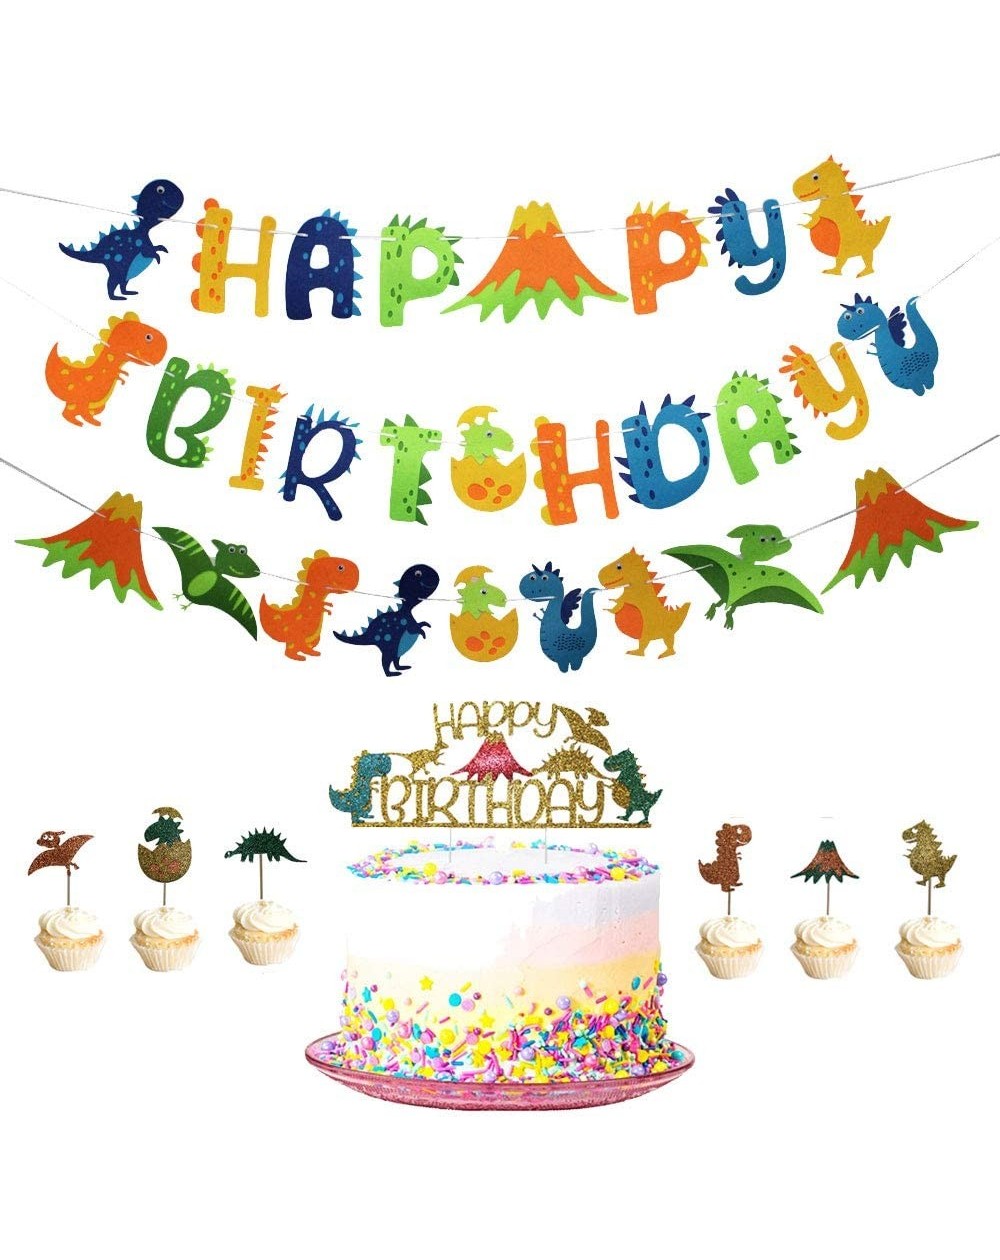 Banners & Garlands Dinosaur Birthday Party Decorations Kit-Dinosaurs Happy Birthday Banner-Glittery Dinosaur Cake Topper and ...